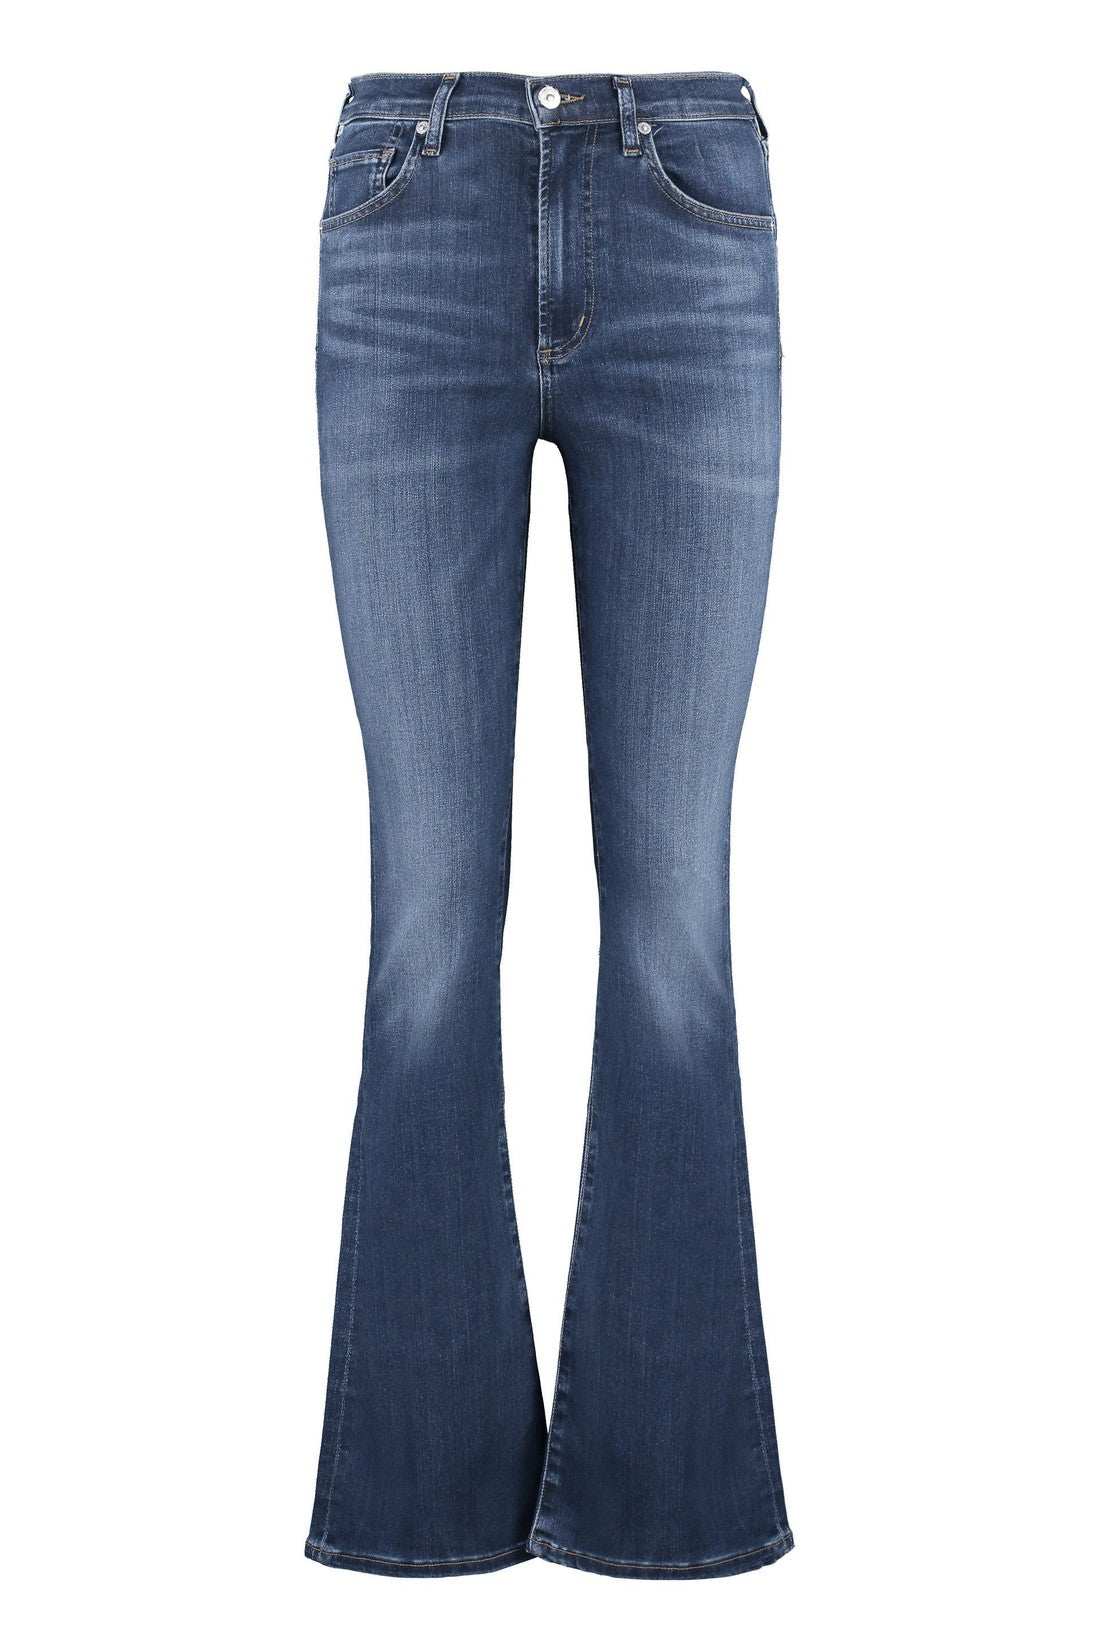 Citizens of Humanity-OUTLET-SALE-Lilah bootcut jeans-ARCHIVIST